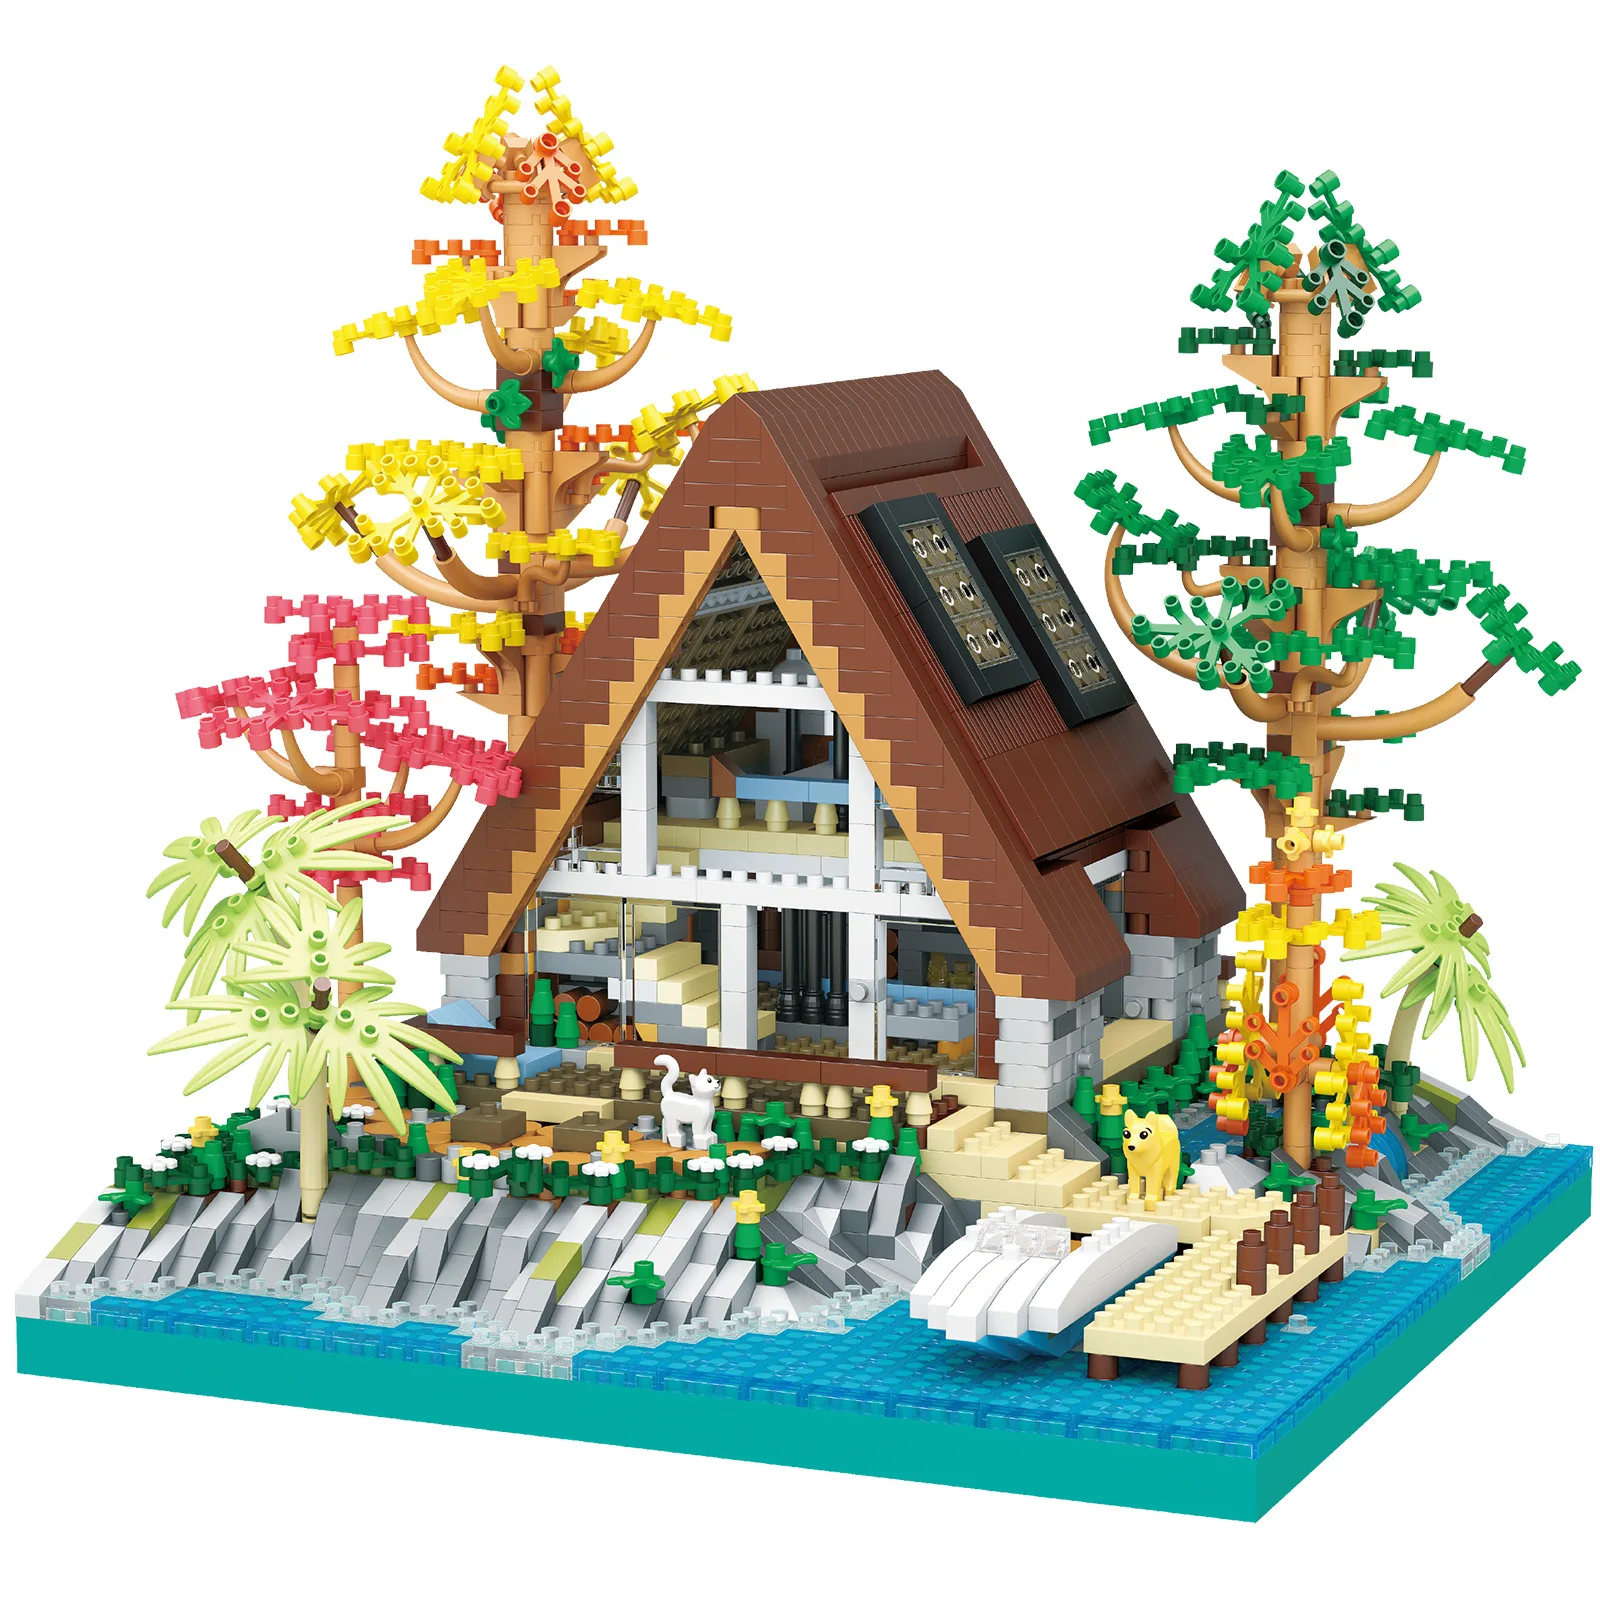 Creative City Street View House Micro Diamond Block Lakeside Cabin Streetscape Model Building Brick Figures Toy For Kids Gifts moc city medieval tree house building series house street view building blocks creative toys assembly model diy children s gifts